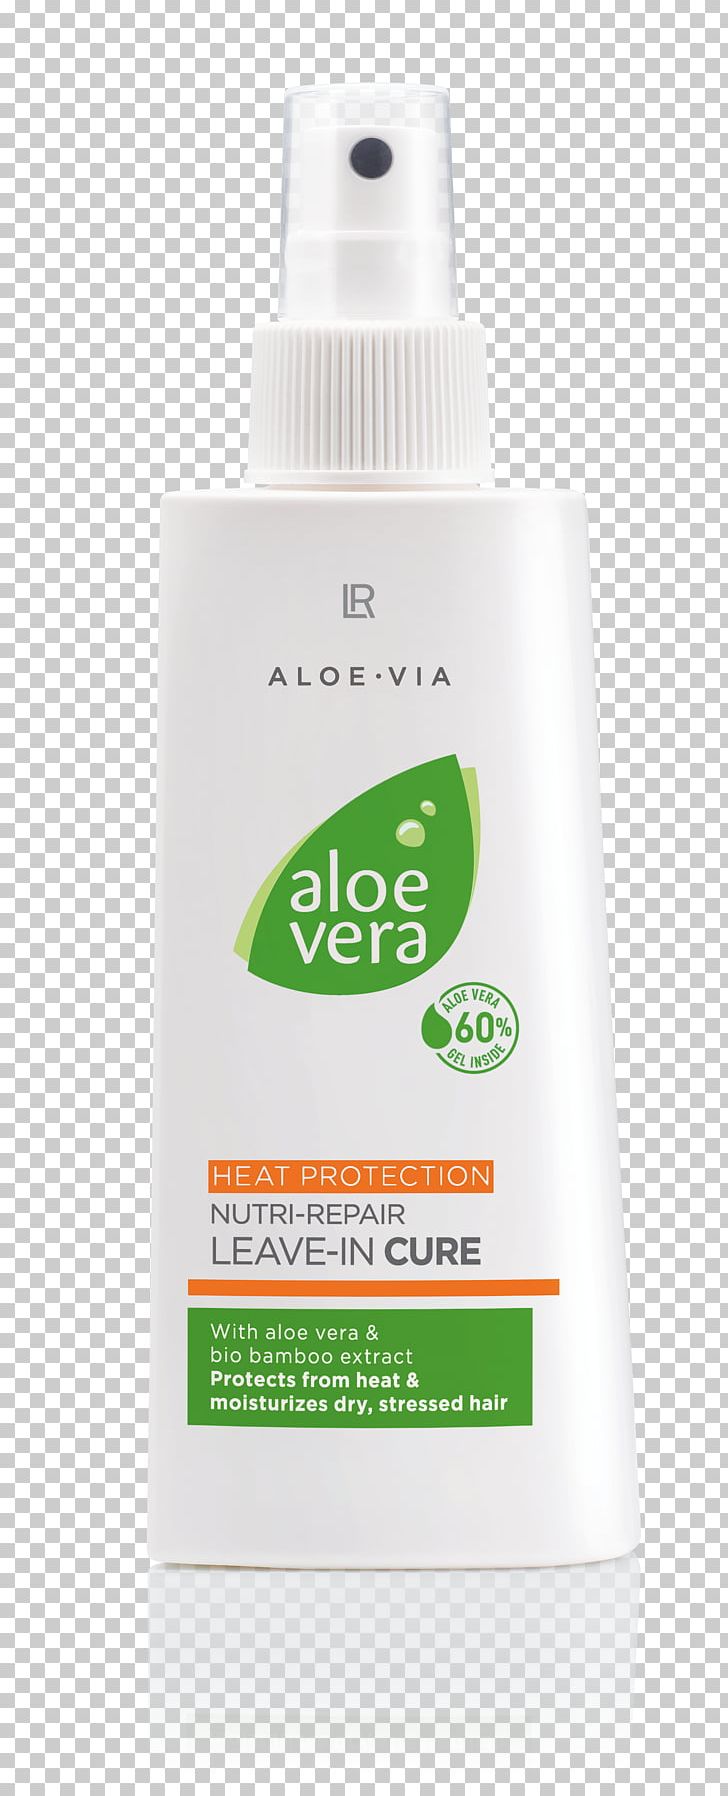 Lotion Aloe Vera Cream Hydratace Product PNG, Clipart, Aloe Vera, Cream, Foot, Hydratace, Liquid Free PNG Download